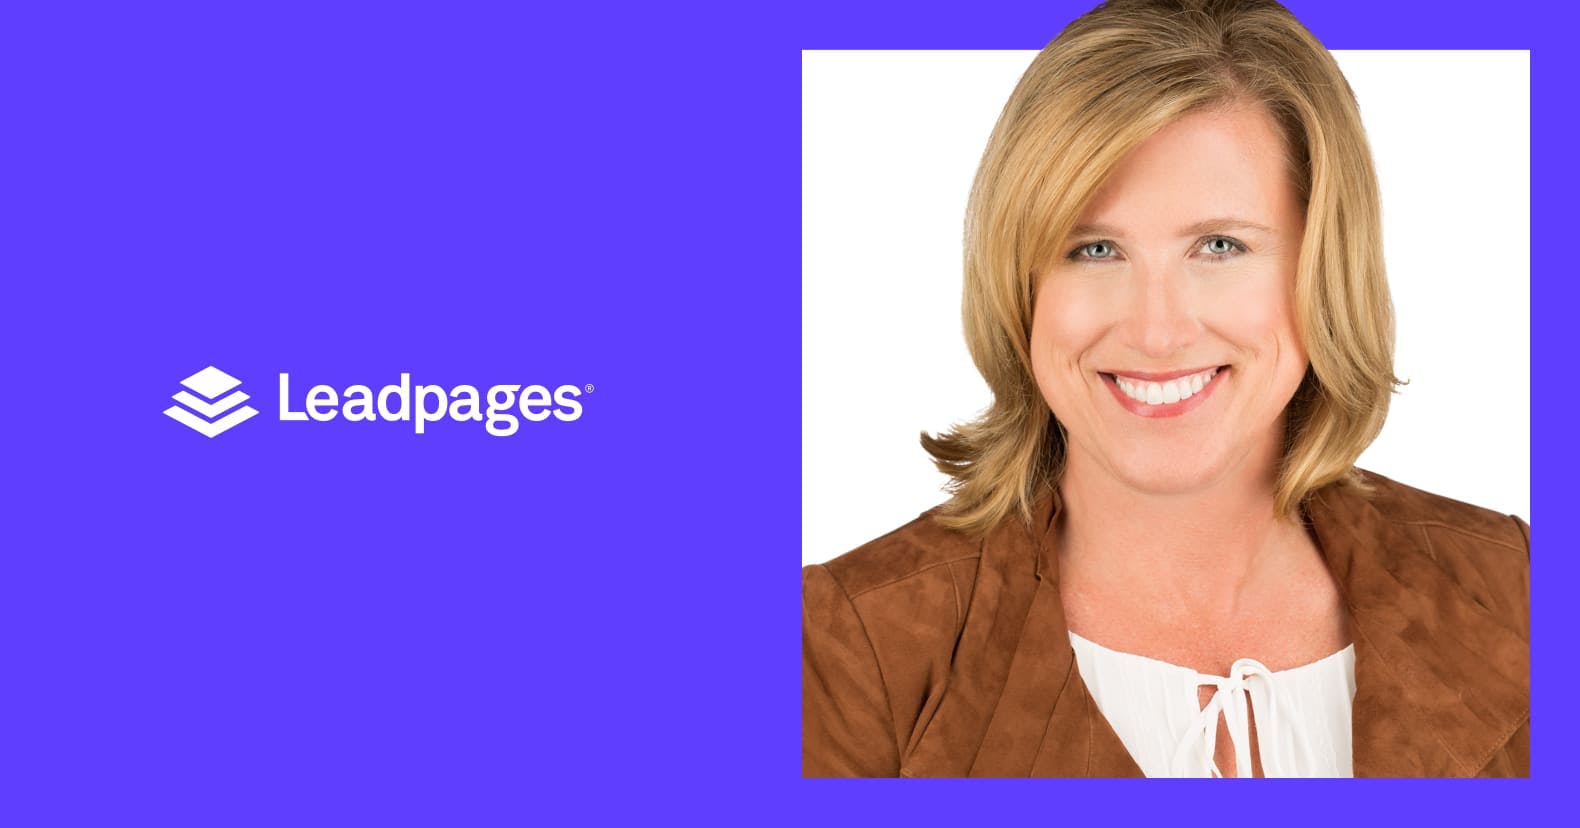 00 Leadpages Appoints Jeanette Dorazio As Ceo@2x